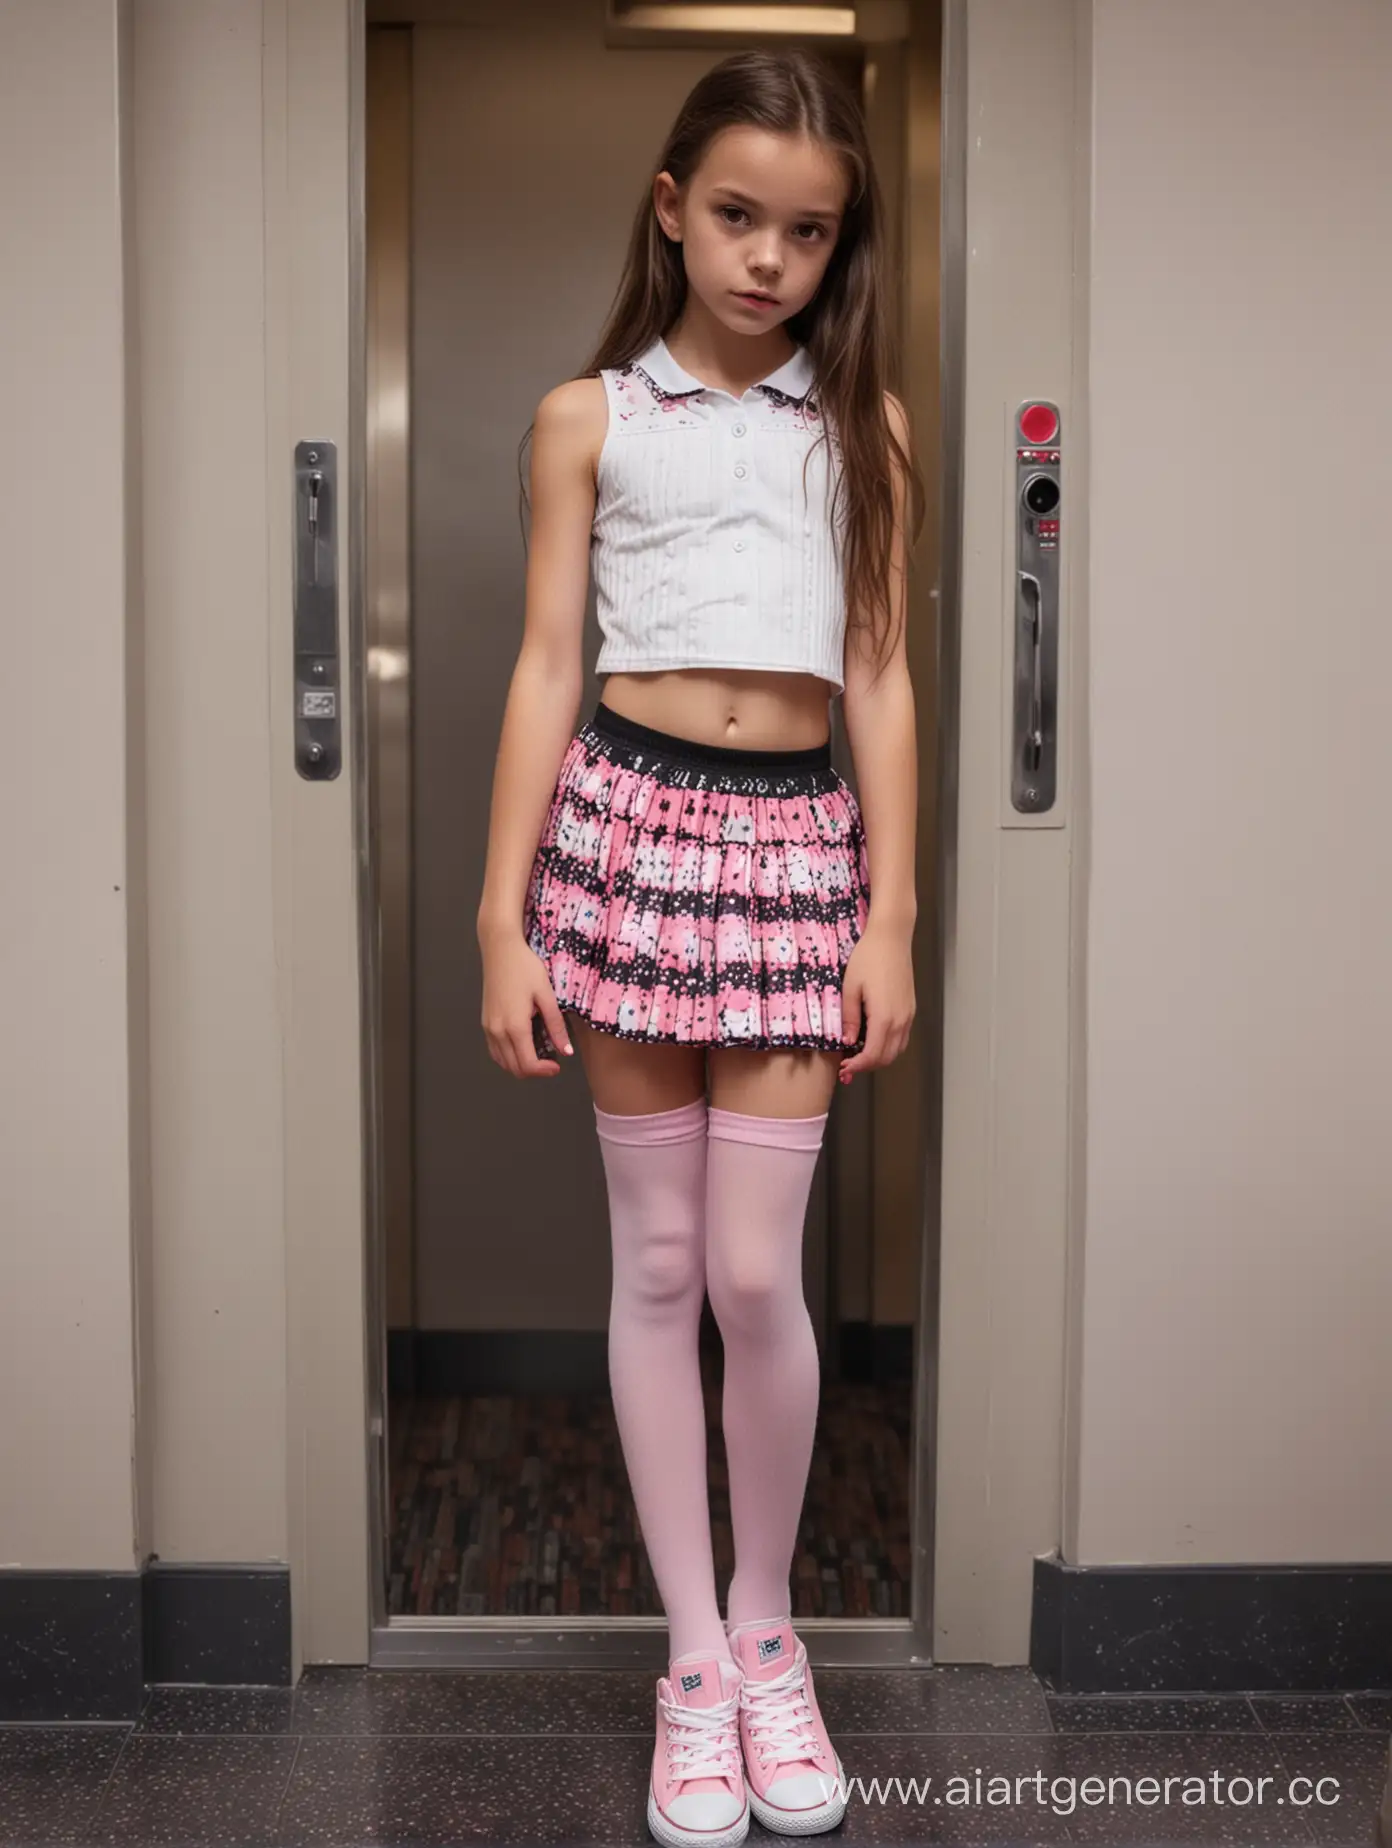 Lonely-Girl-in-Elevator-Depicting-a-Sad-12YearOld-in-Pink-and-White-Attire